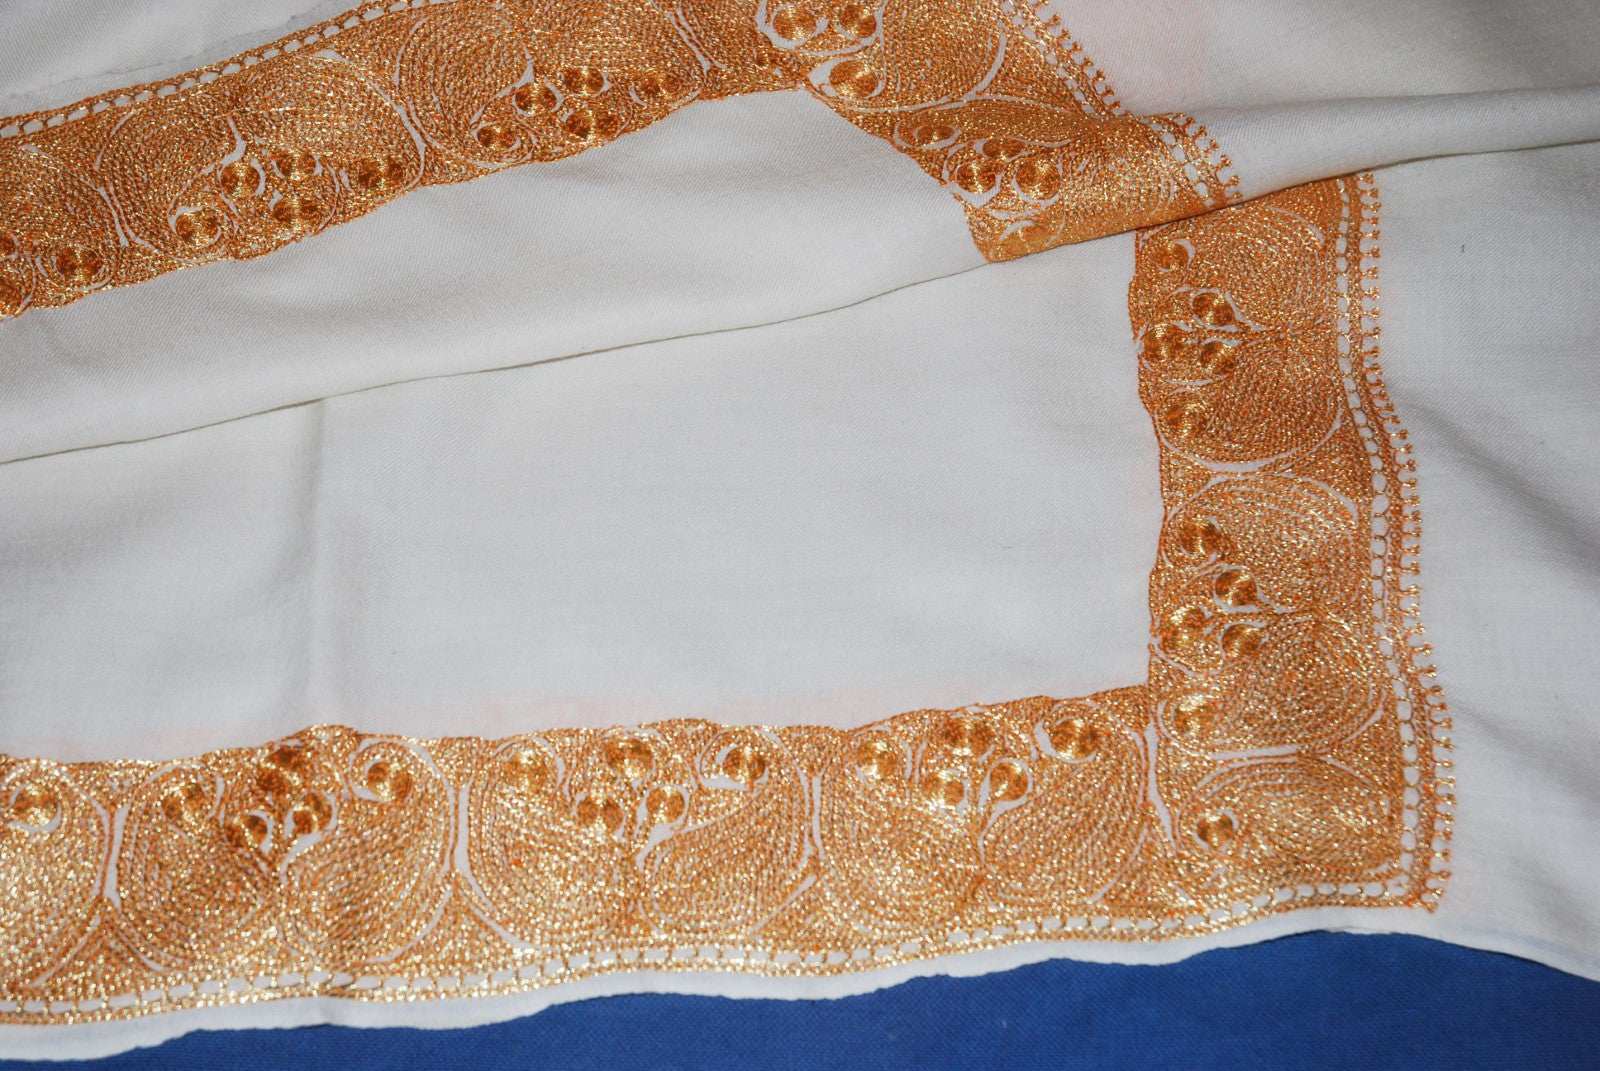 Embroidered Wool Shawl White, Gold "Tilla" Sozni Embroidery #WS-920